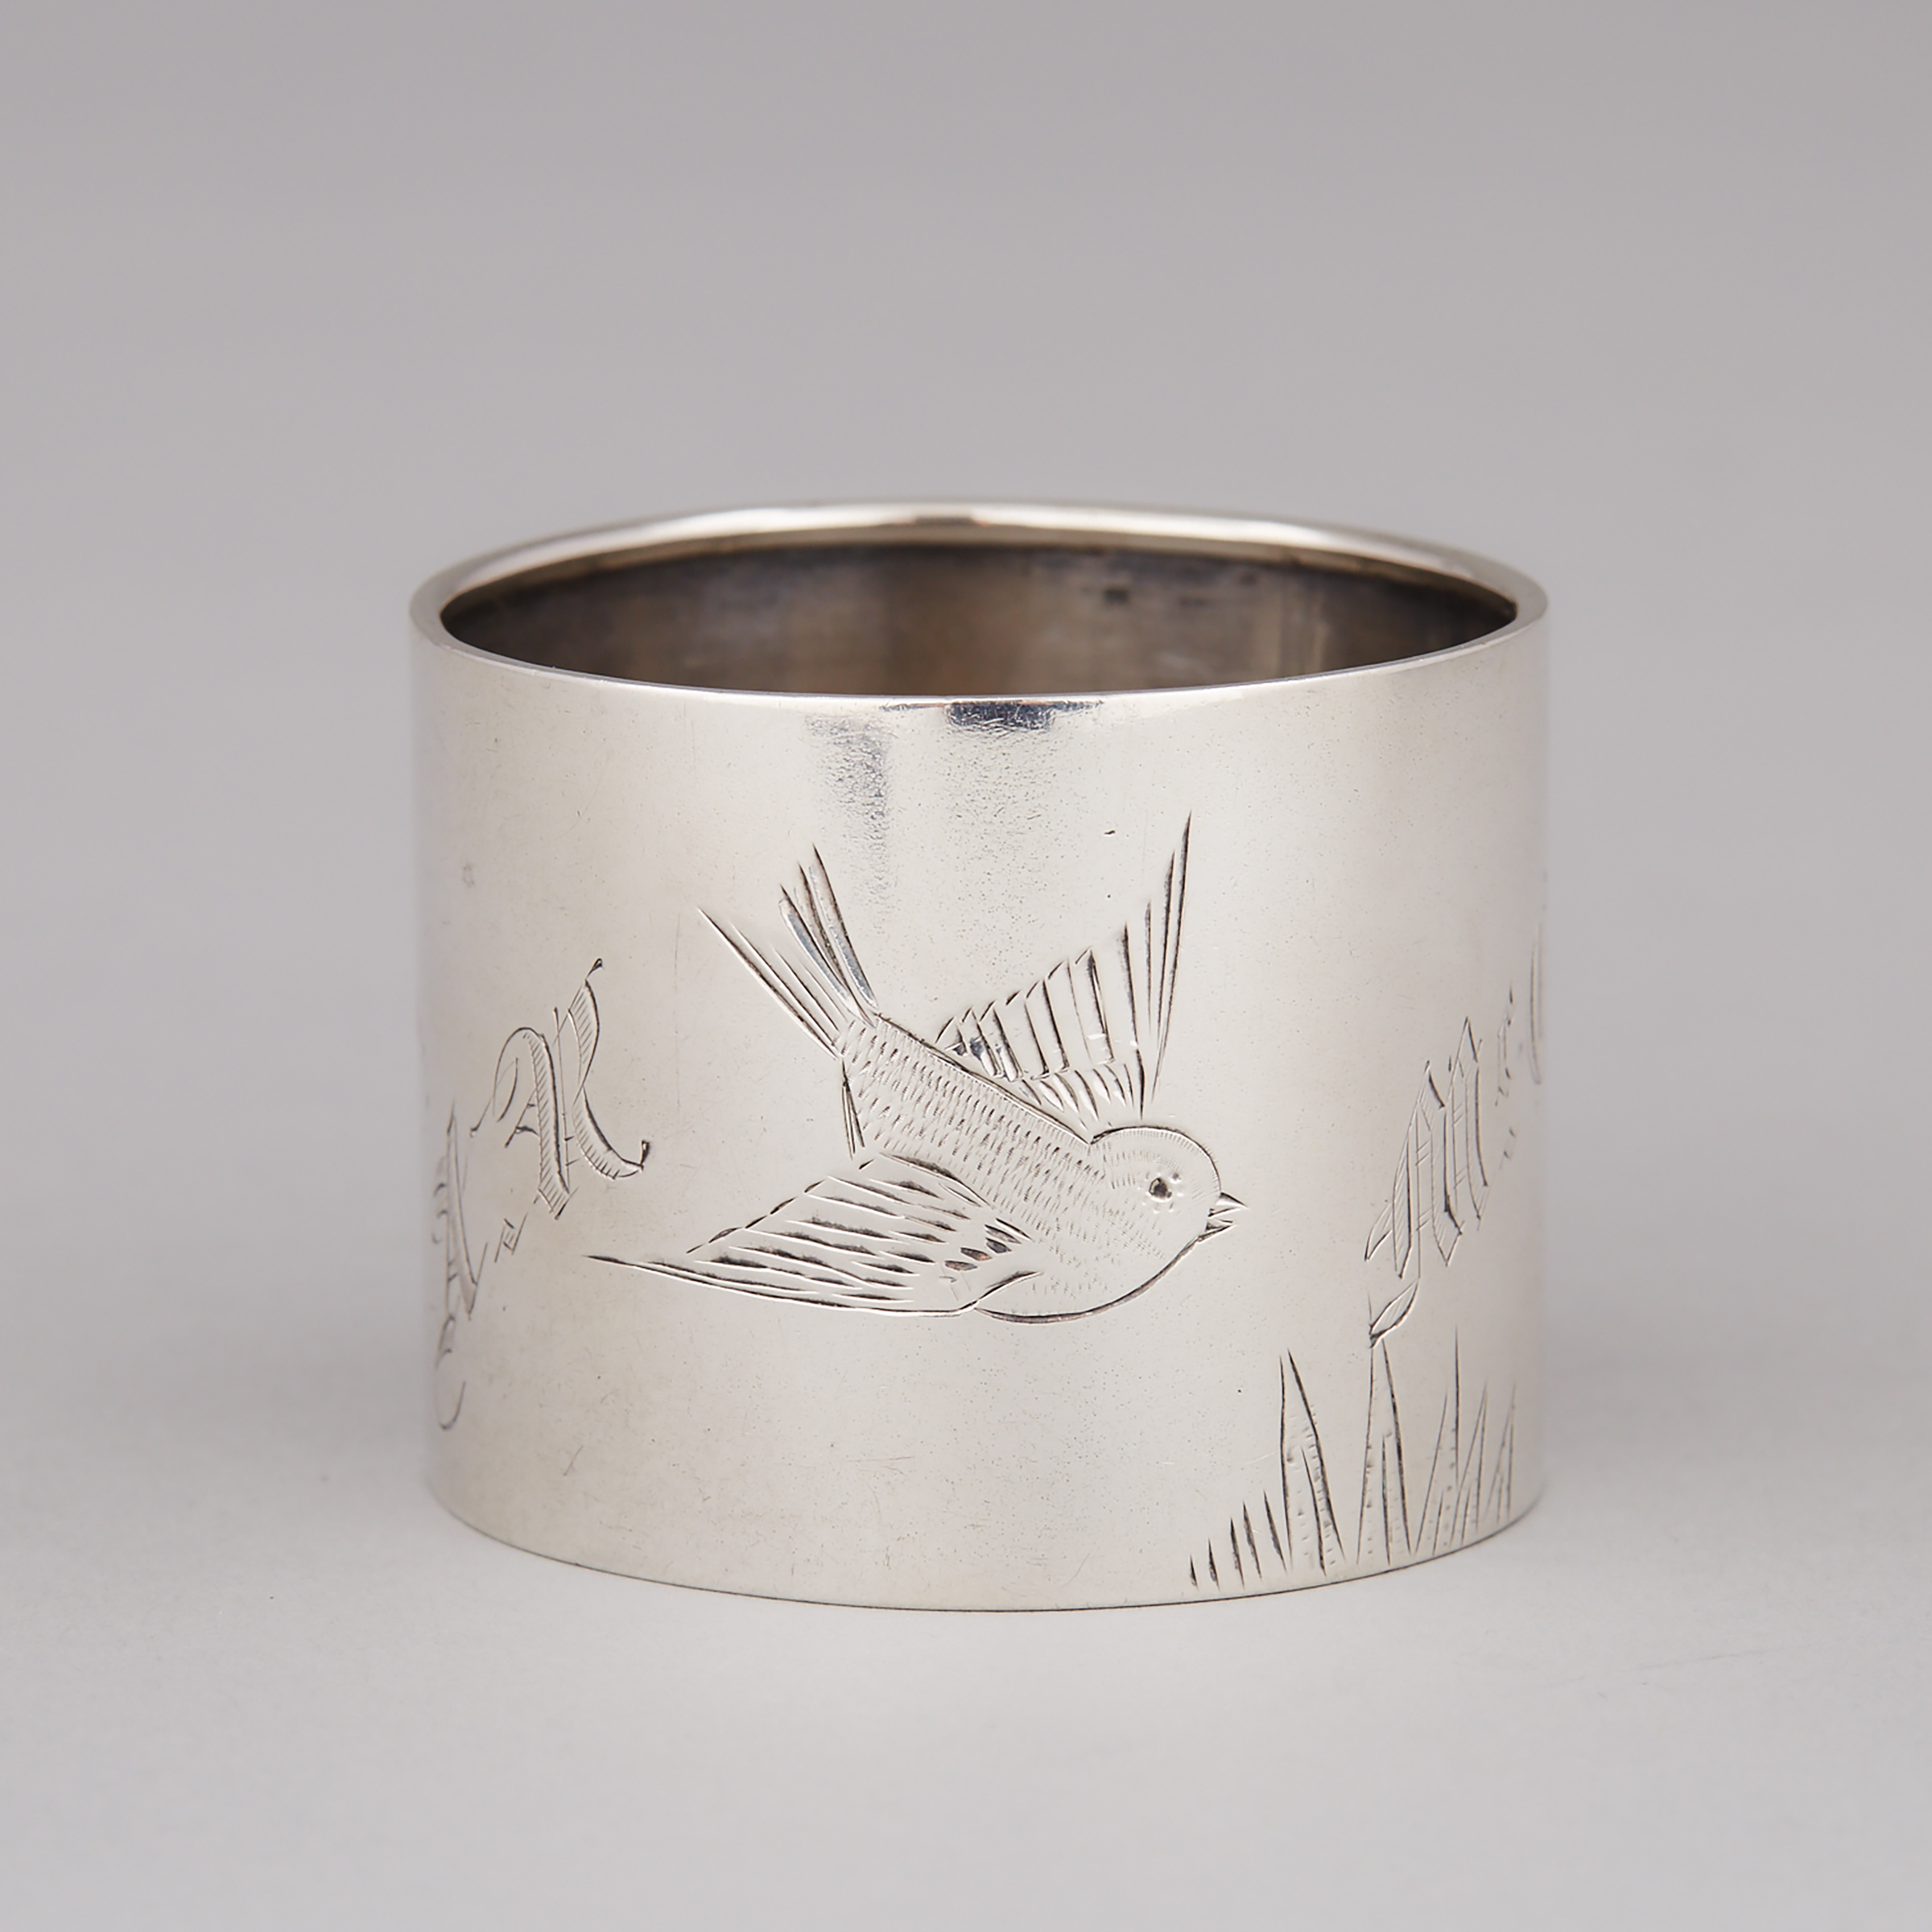 Canadian Silver Napkin Ring, Robert Hendery & Co., Montreal, Que., 1880s